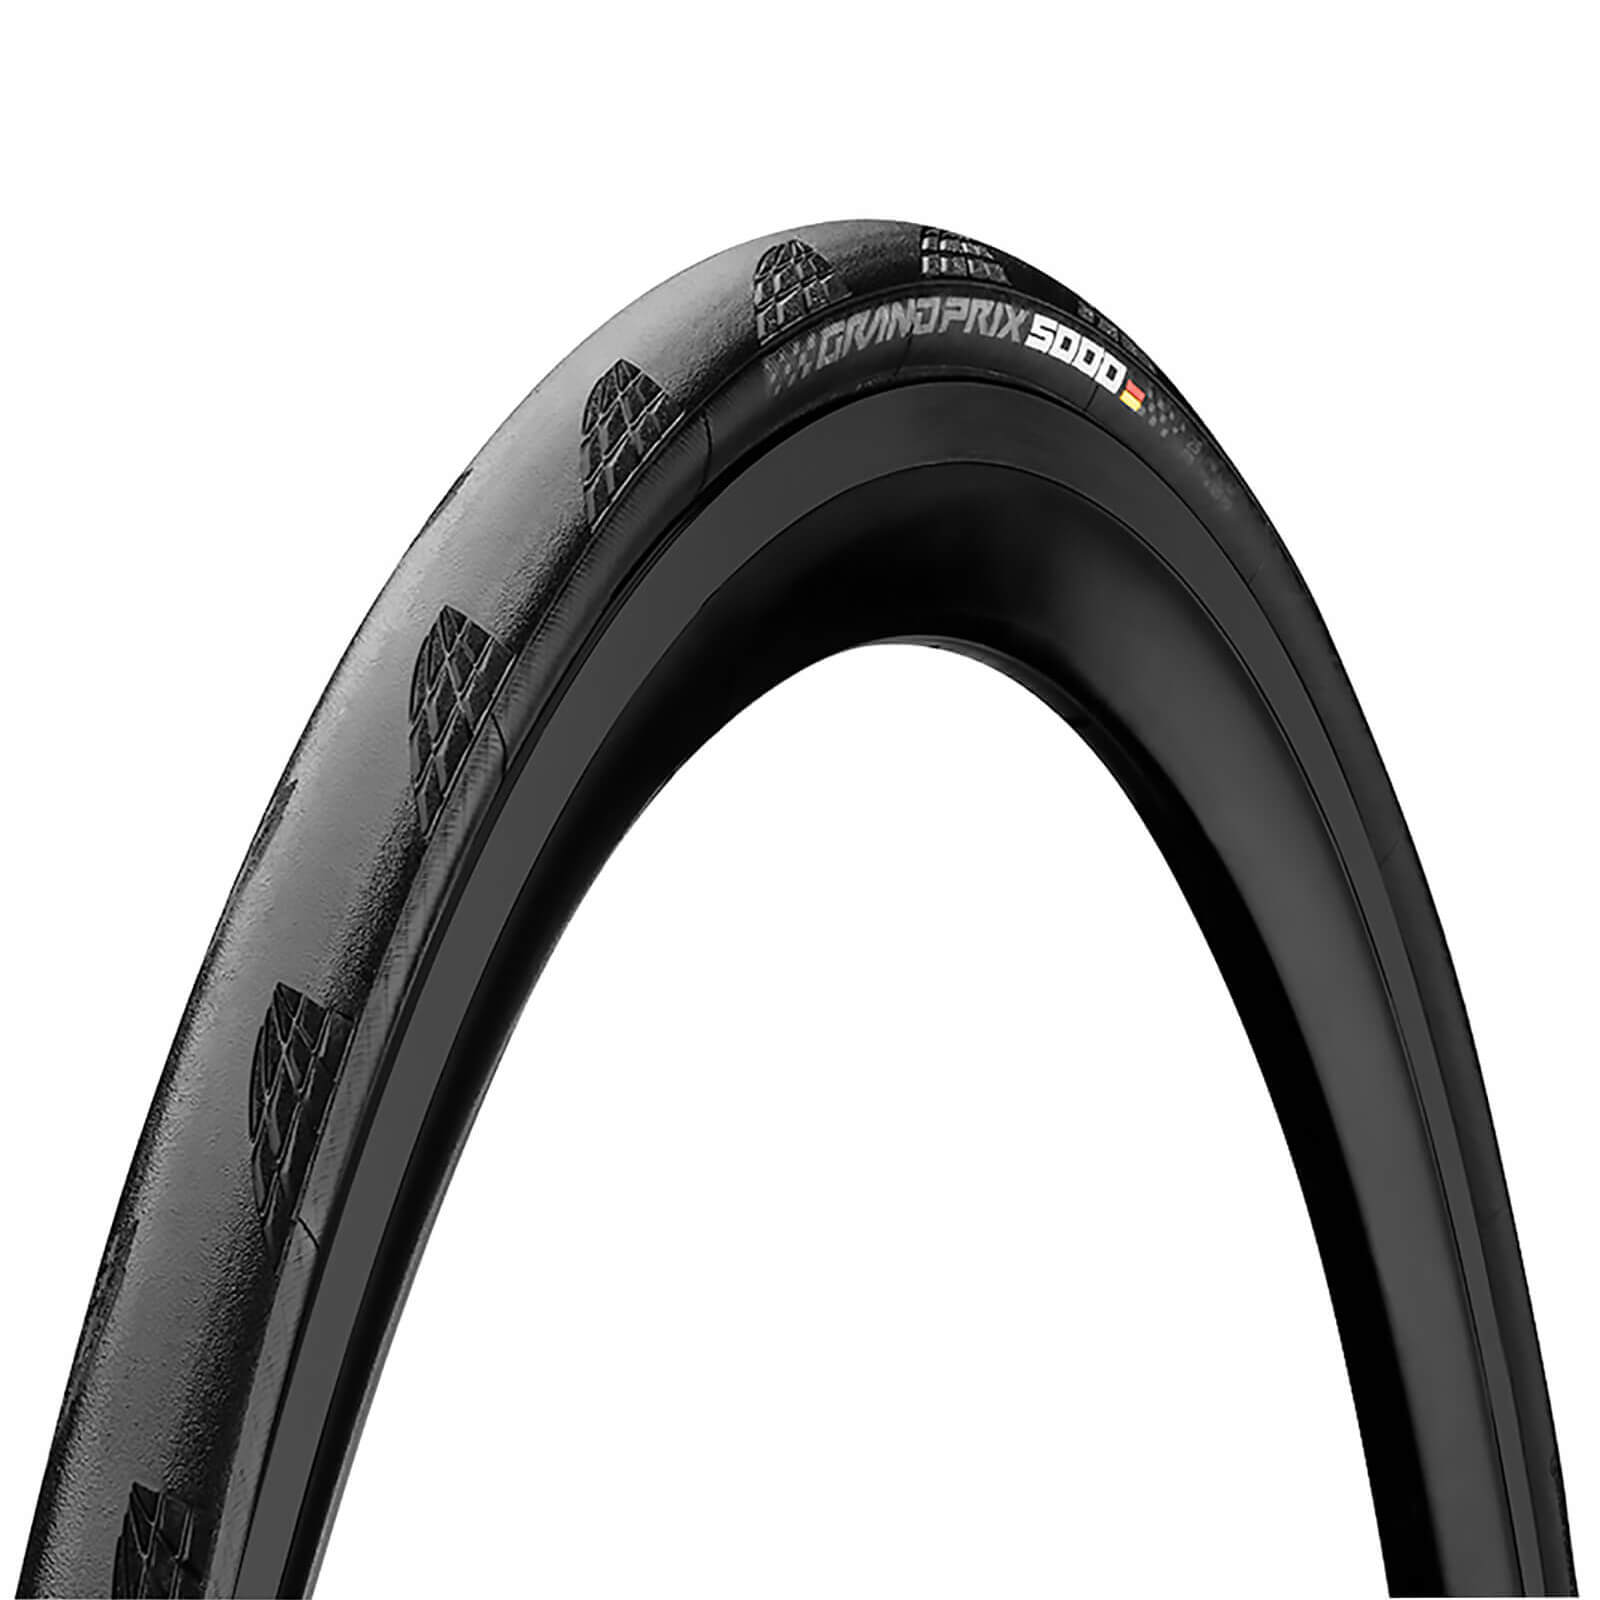 Image of Continental GP5000 Folding Clincher Road Tyre - 700c - Black / 700c / 25mm / Folding / Clincher